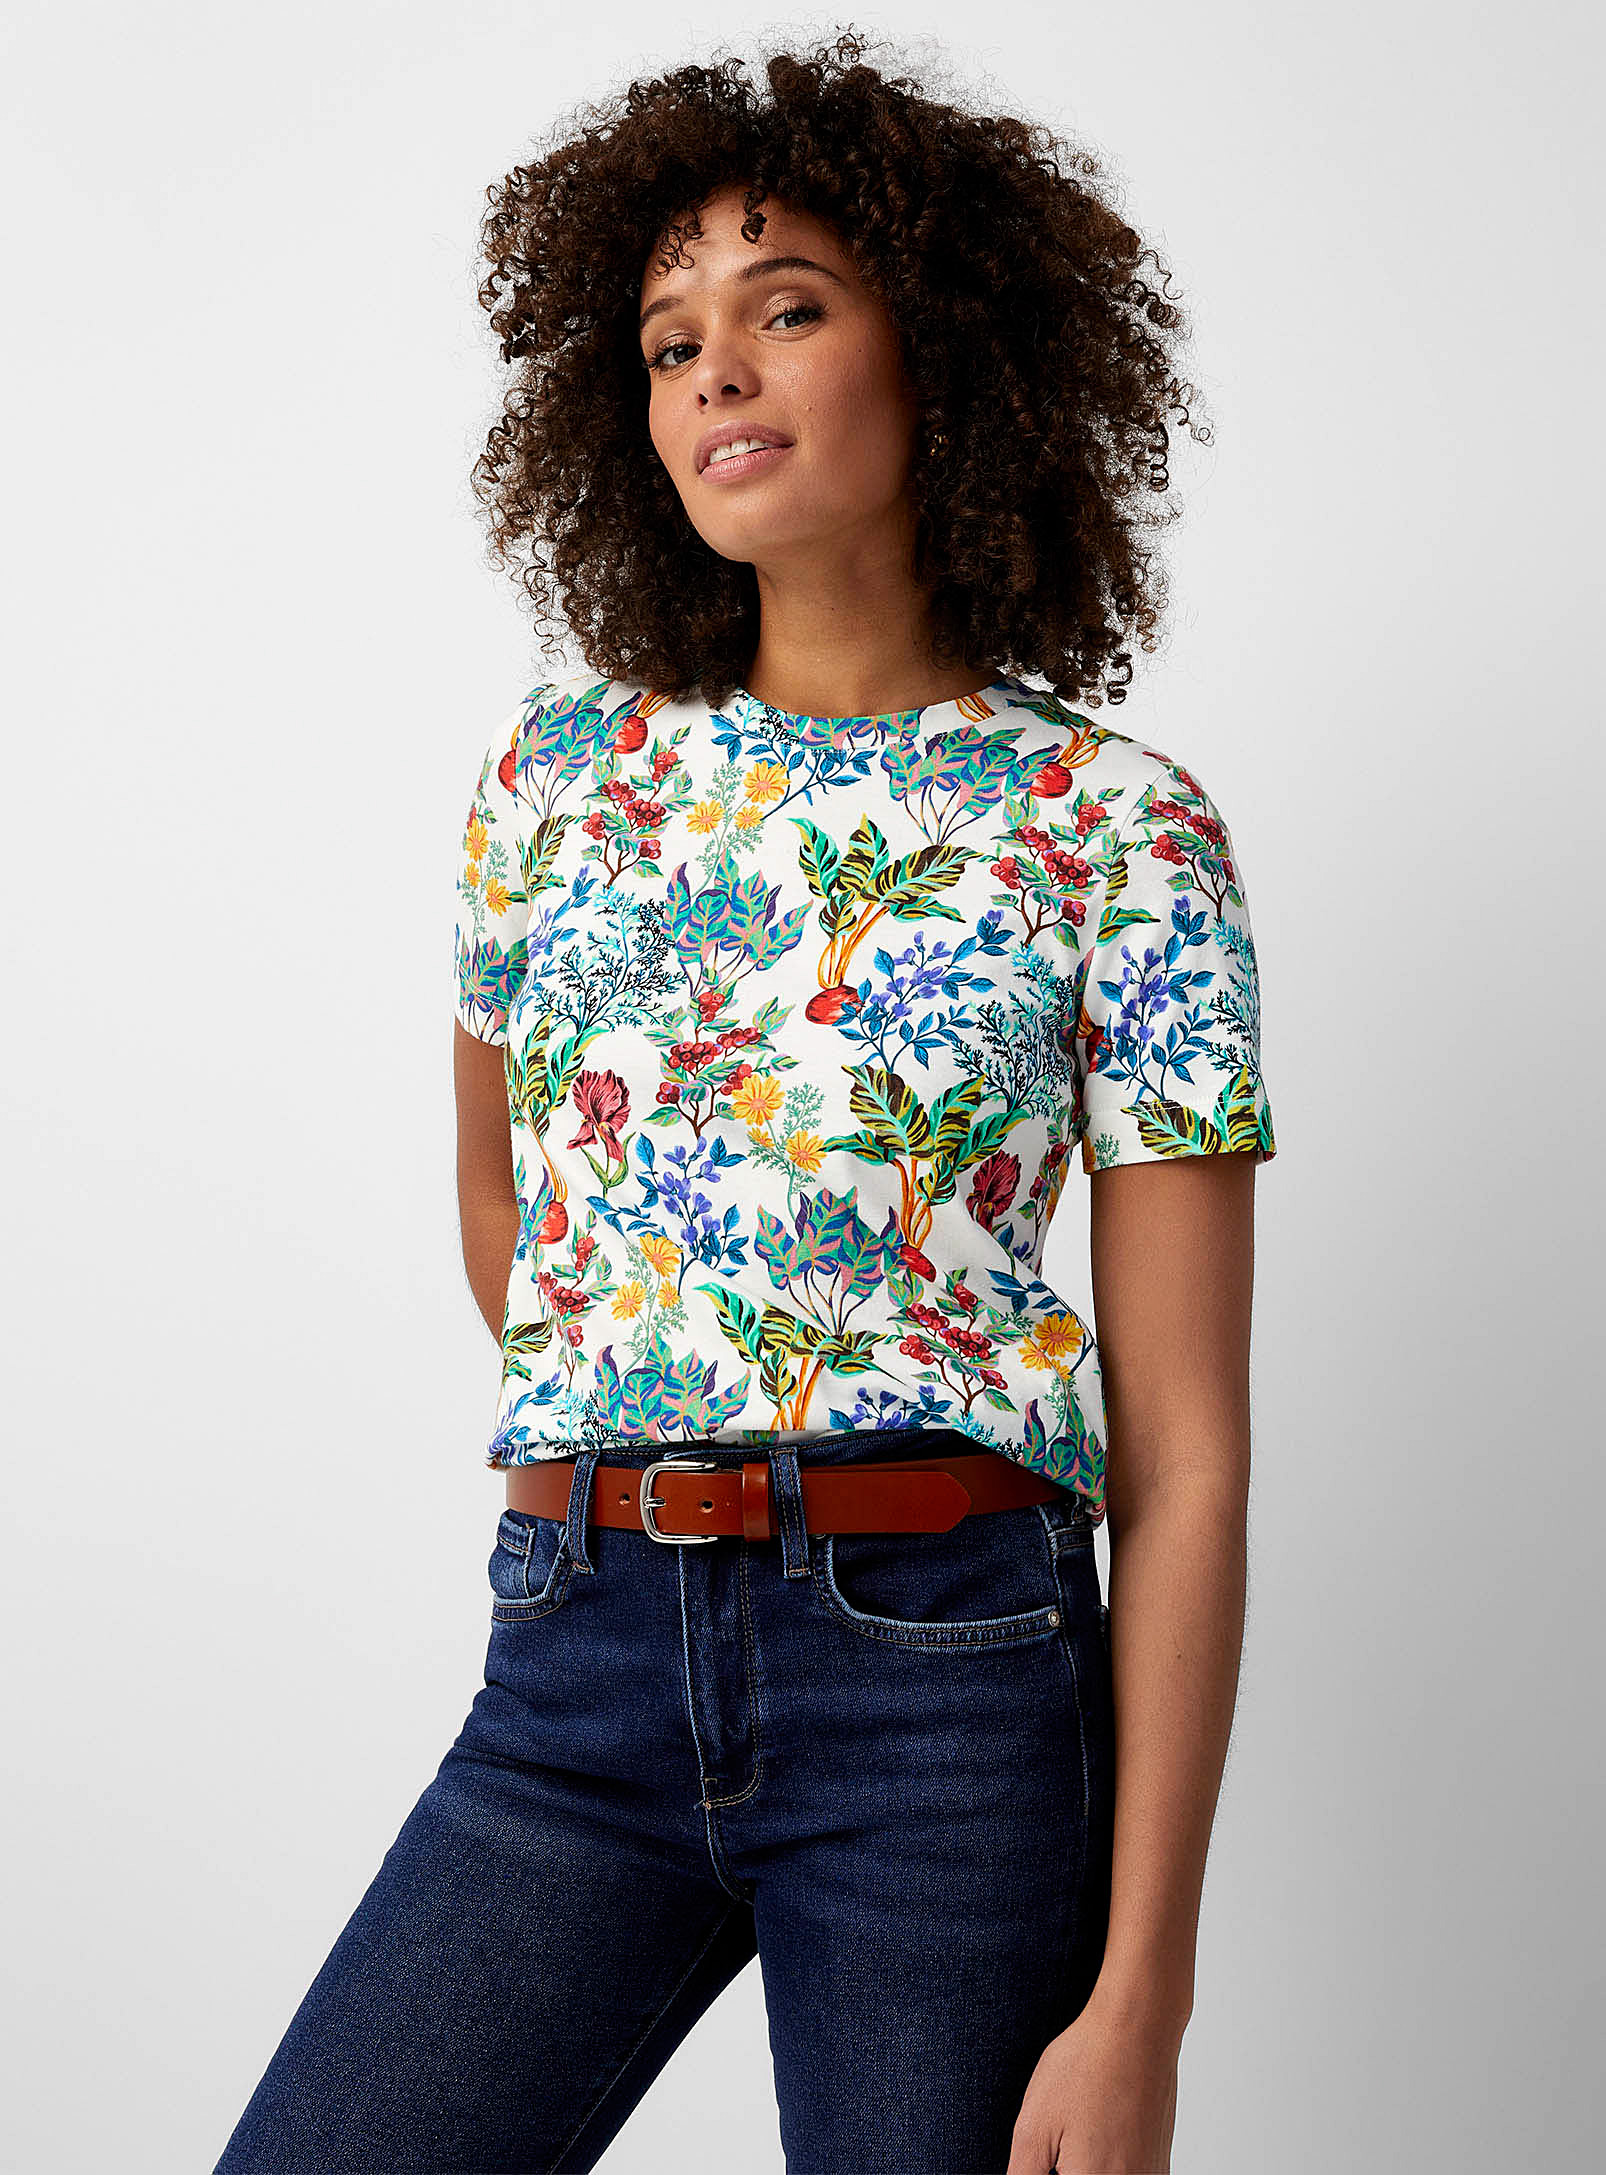 Contemporaine Lush Garden T-shirt Made With Liberty Fabric In Patterned White